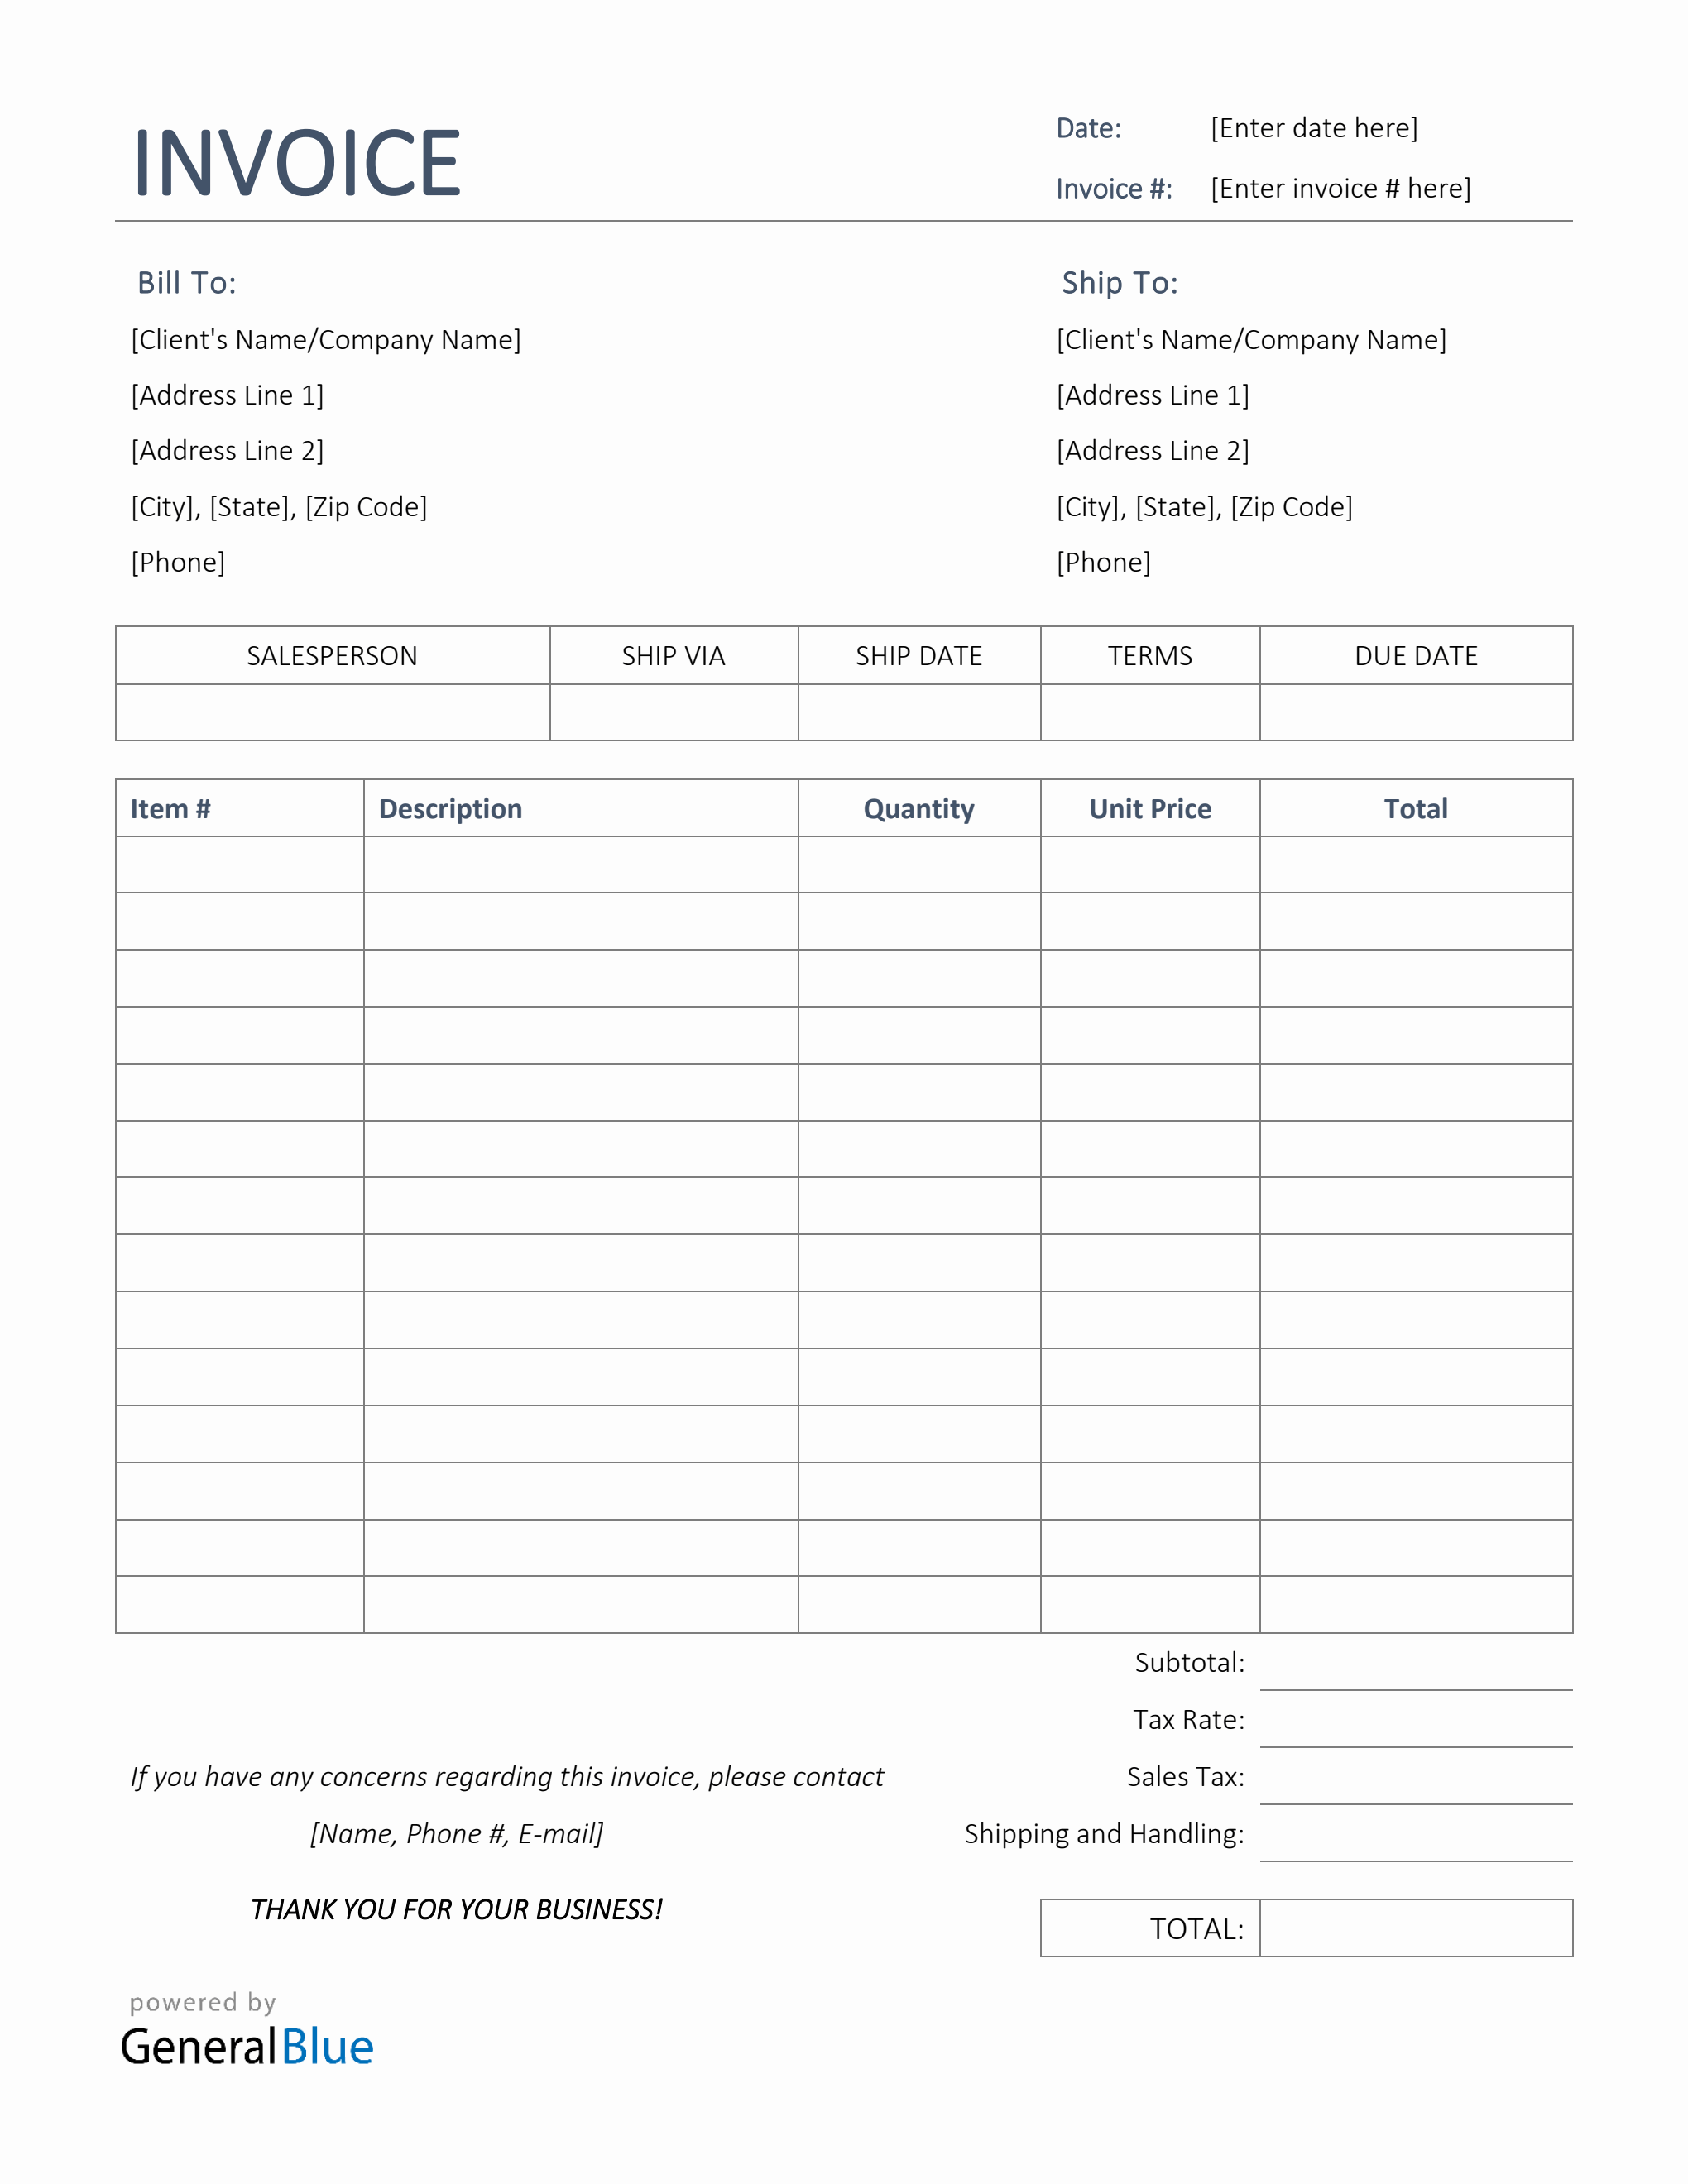 Sales Invoice Template in Word (Simple) Regarding Template Of Invoice In Word